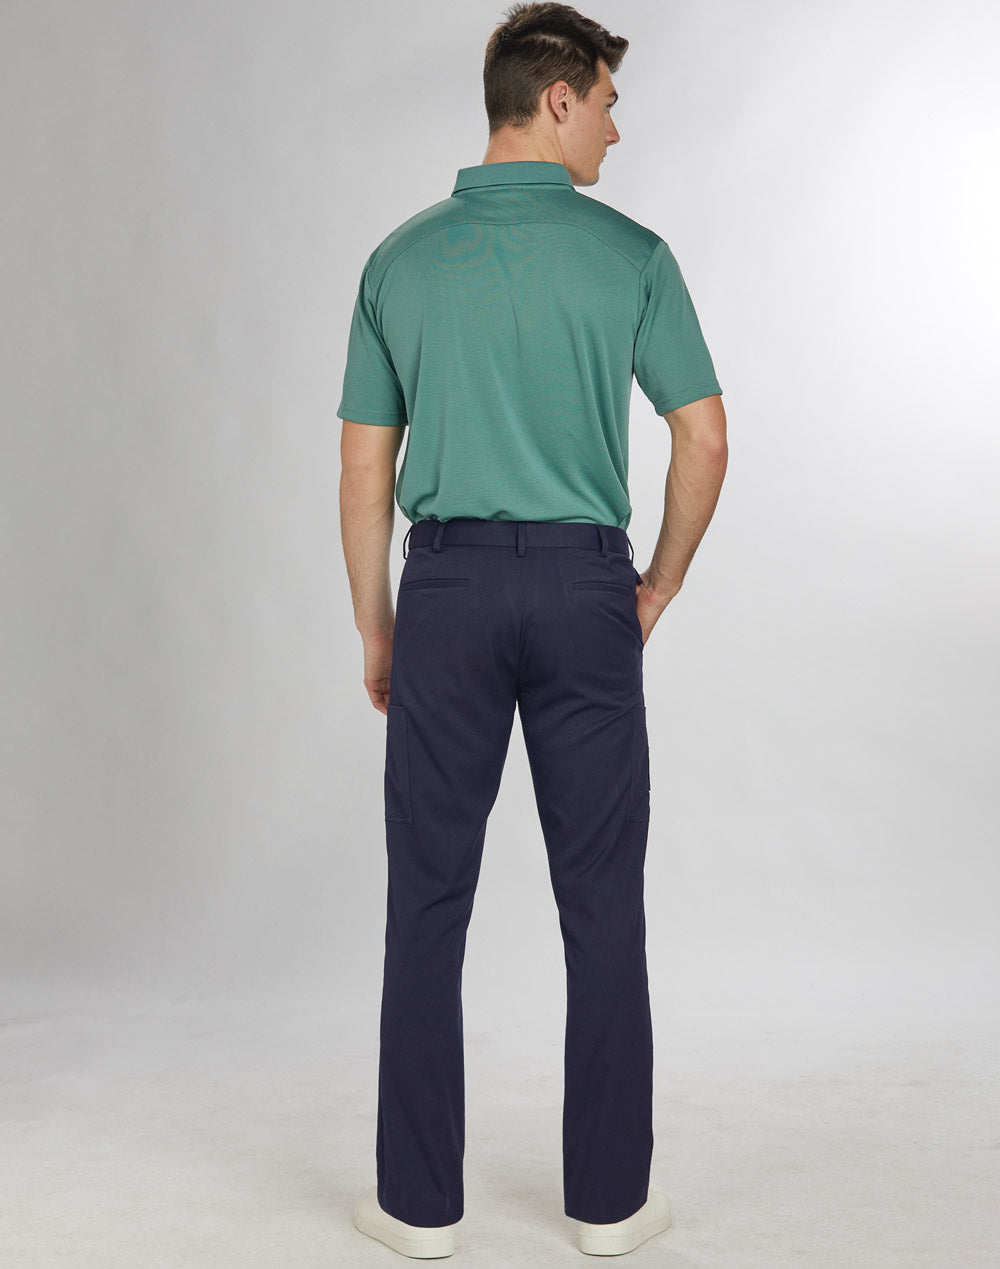 a man in a green shirt and blue pants